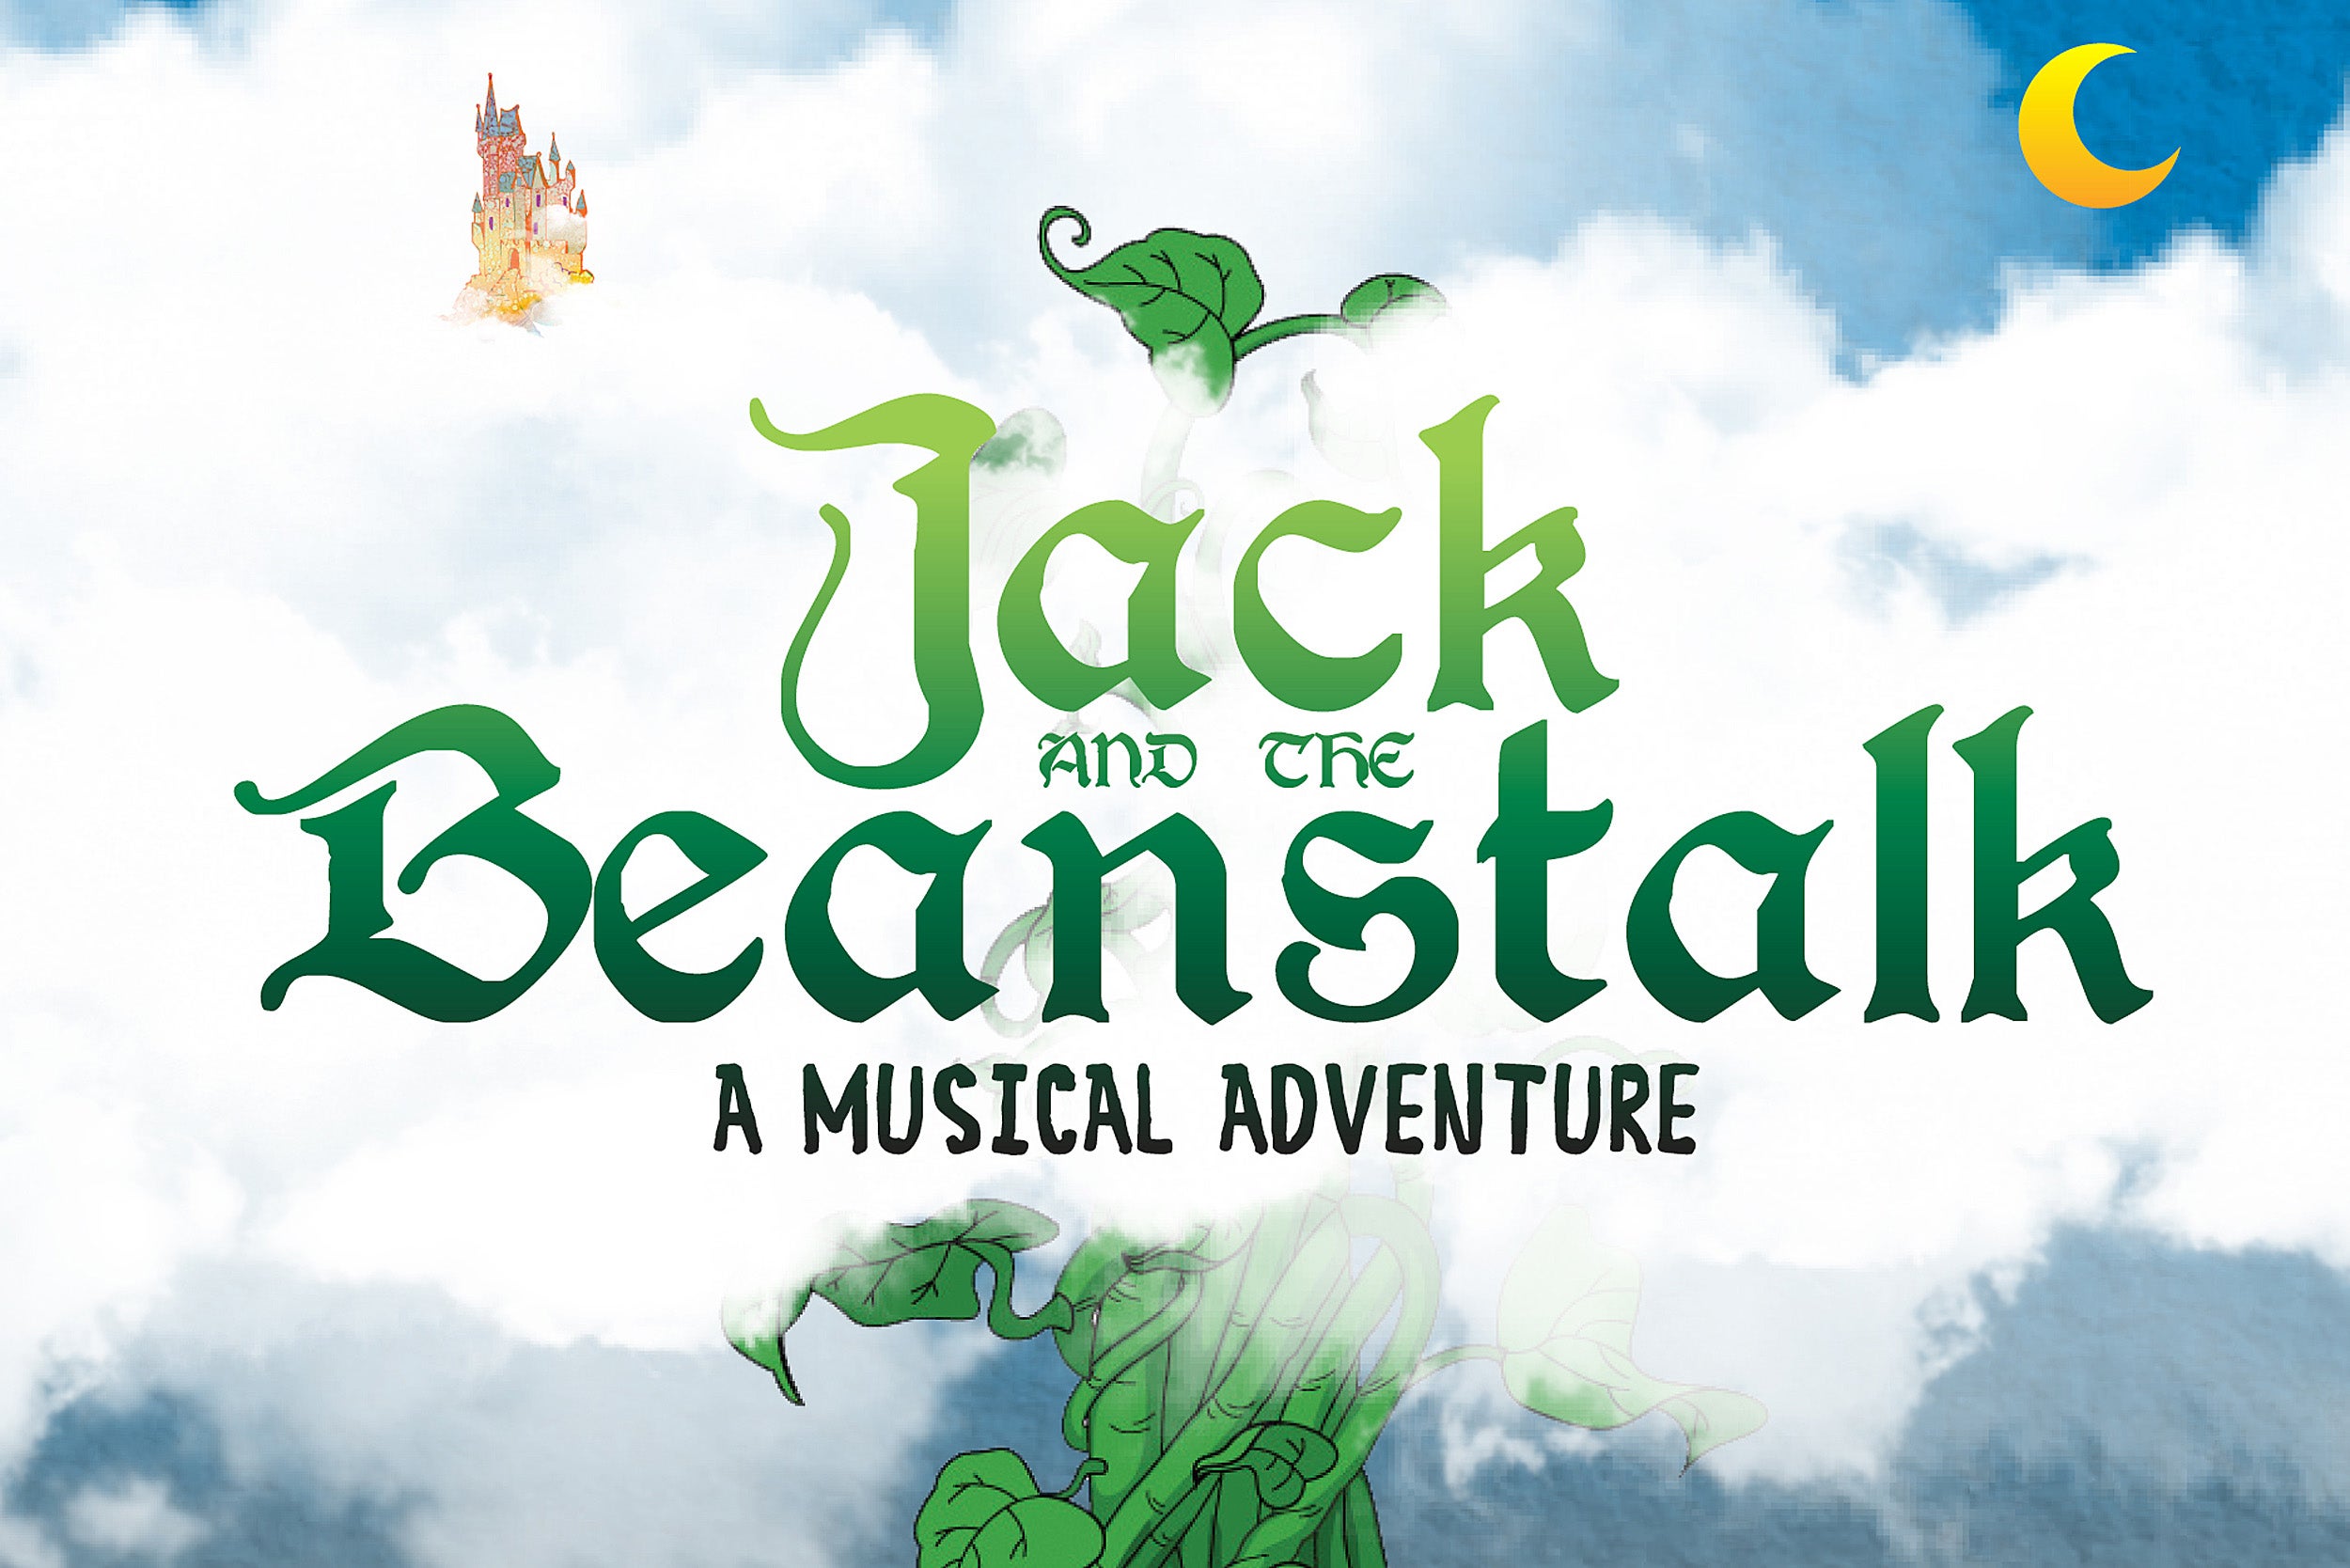 Jack and the Beanstalk title card.